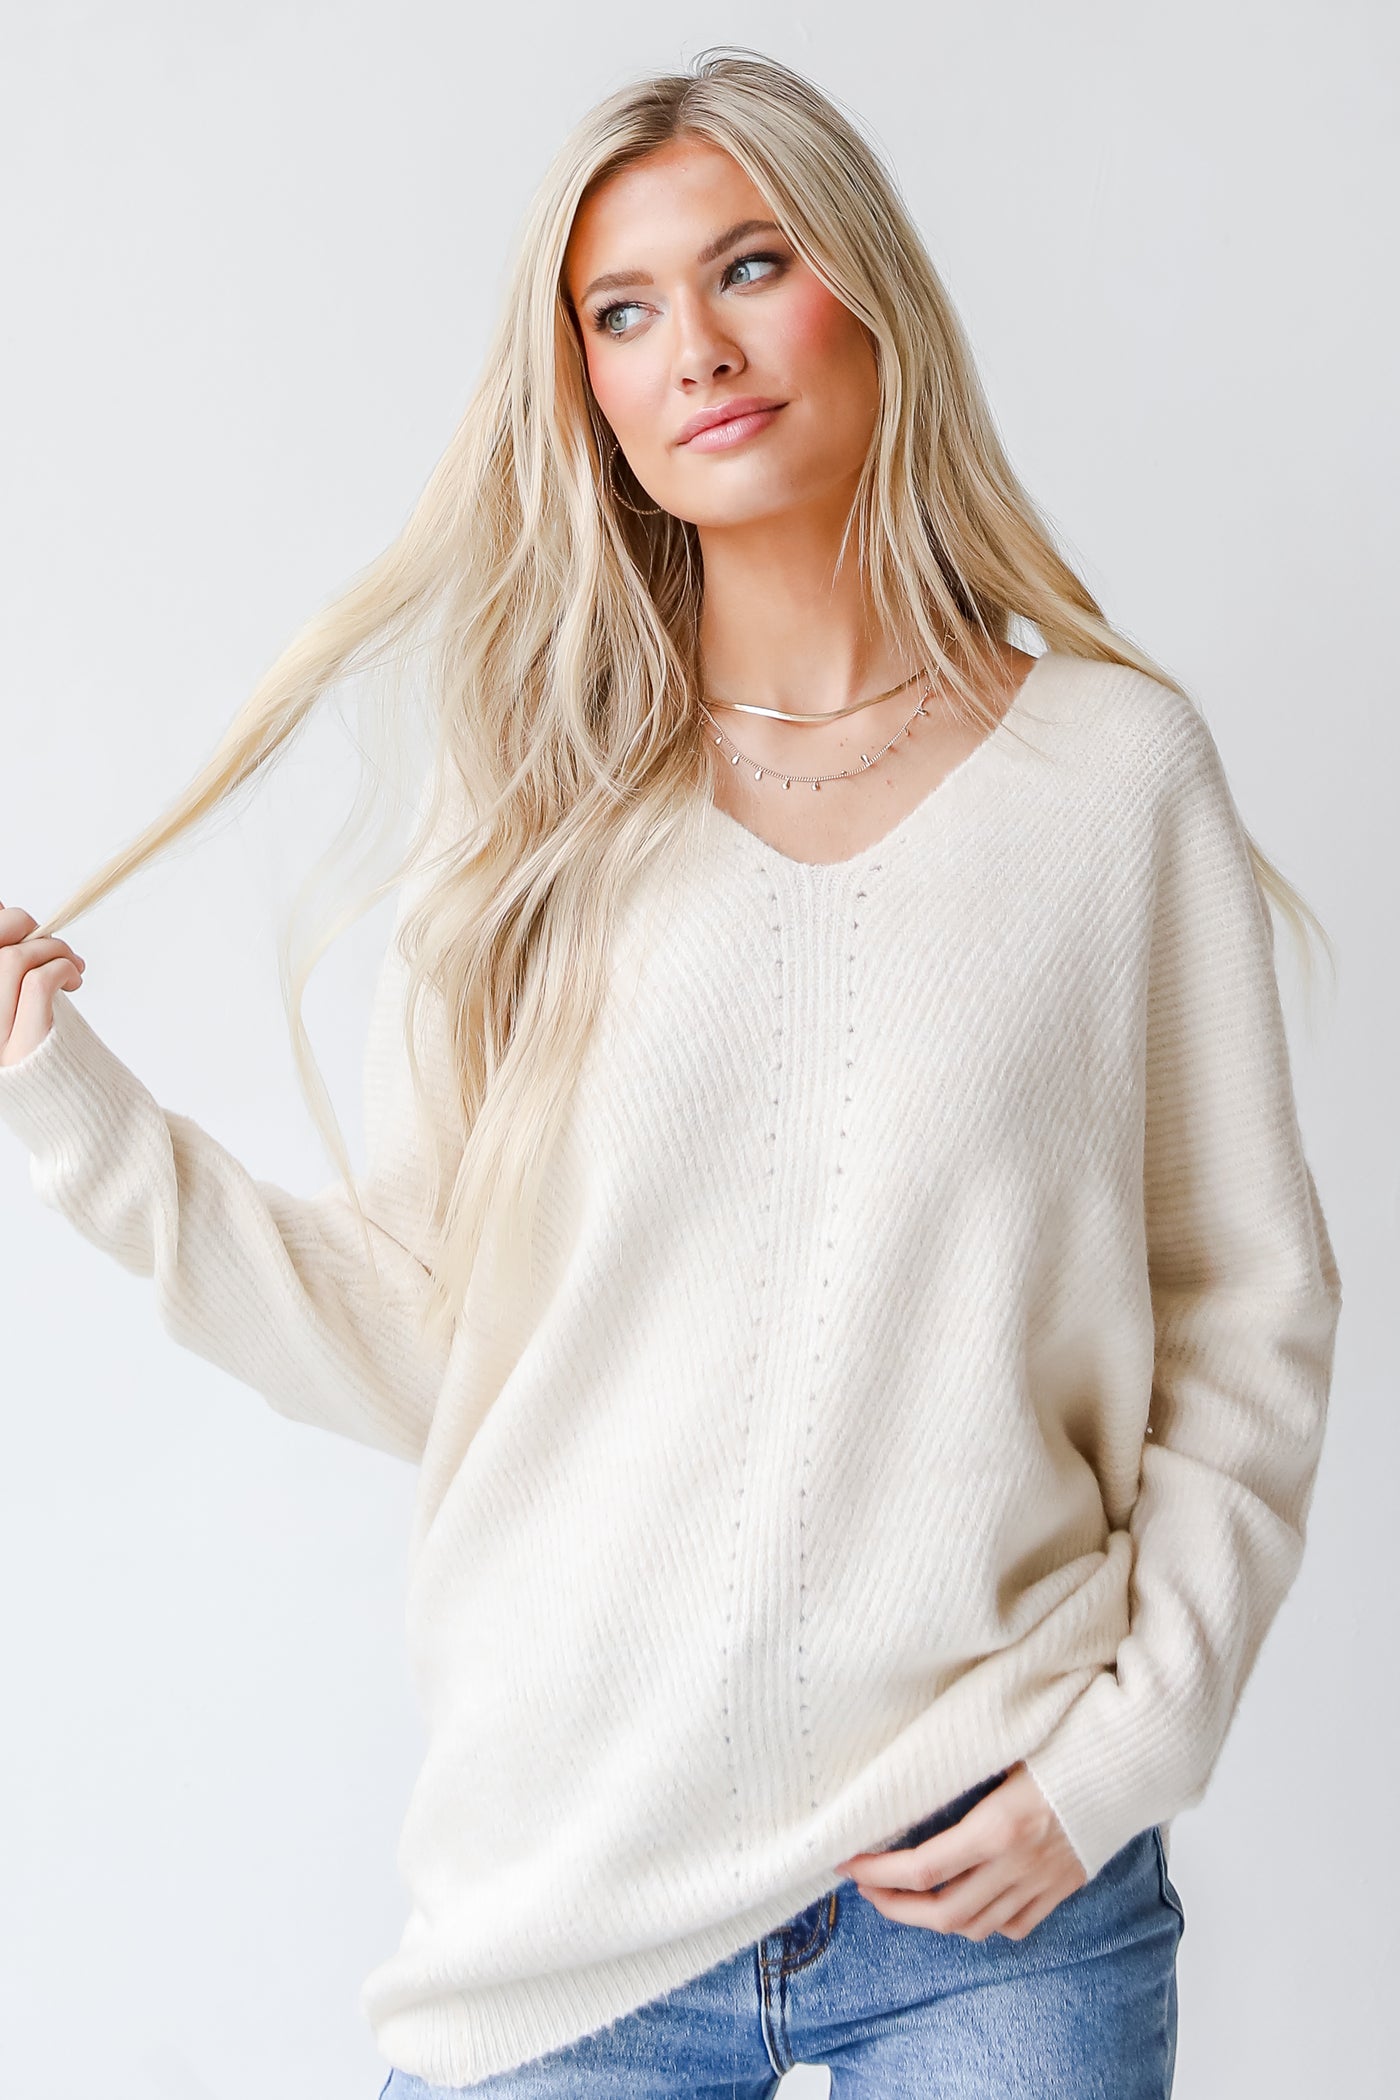 Sweater in Ivory